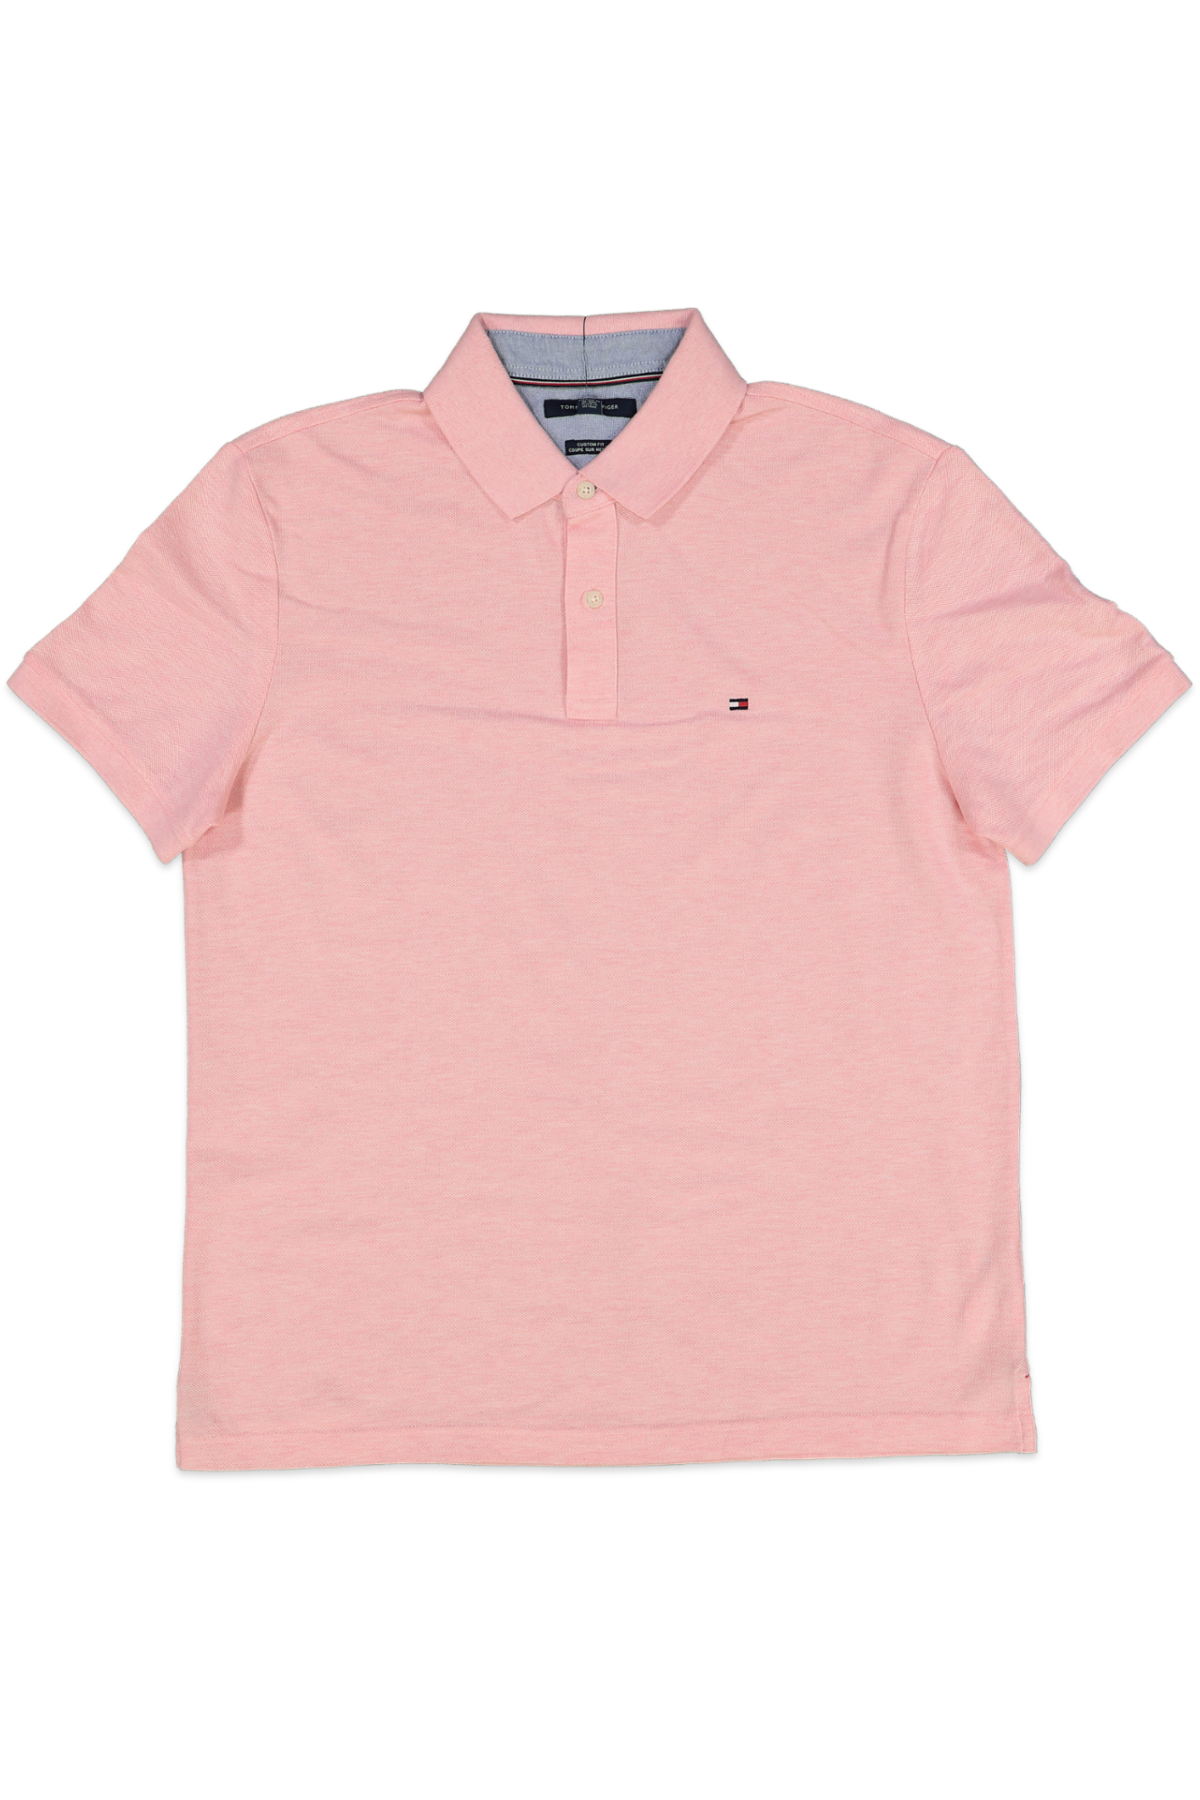 TOMMY HILFIGER ROSE IVY POLO SHIRT